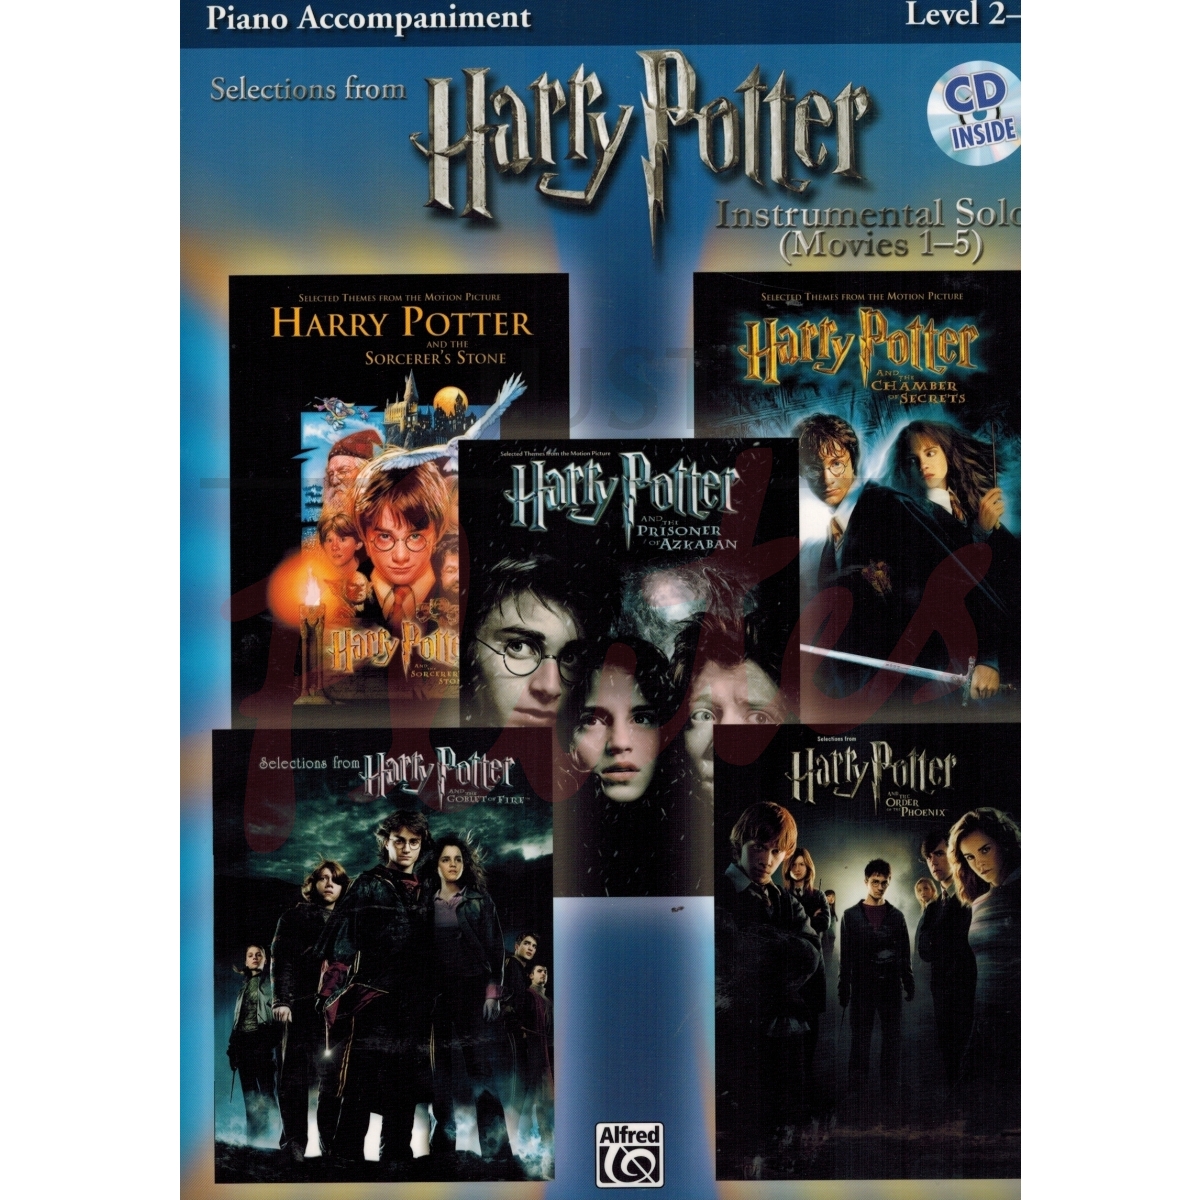 Selections from Harry Potter Movies 1-5 [Piano Accompaniment]